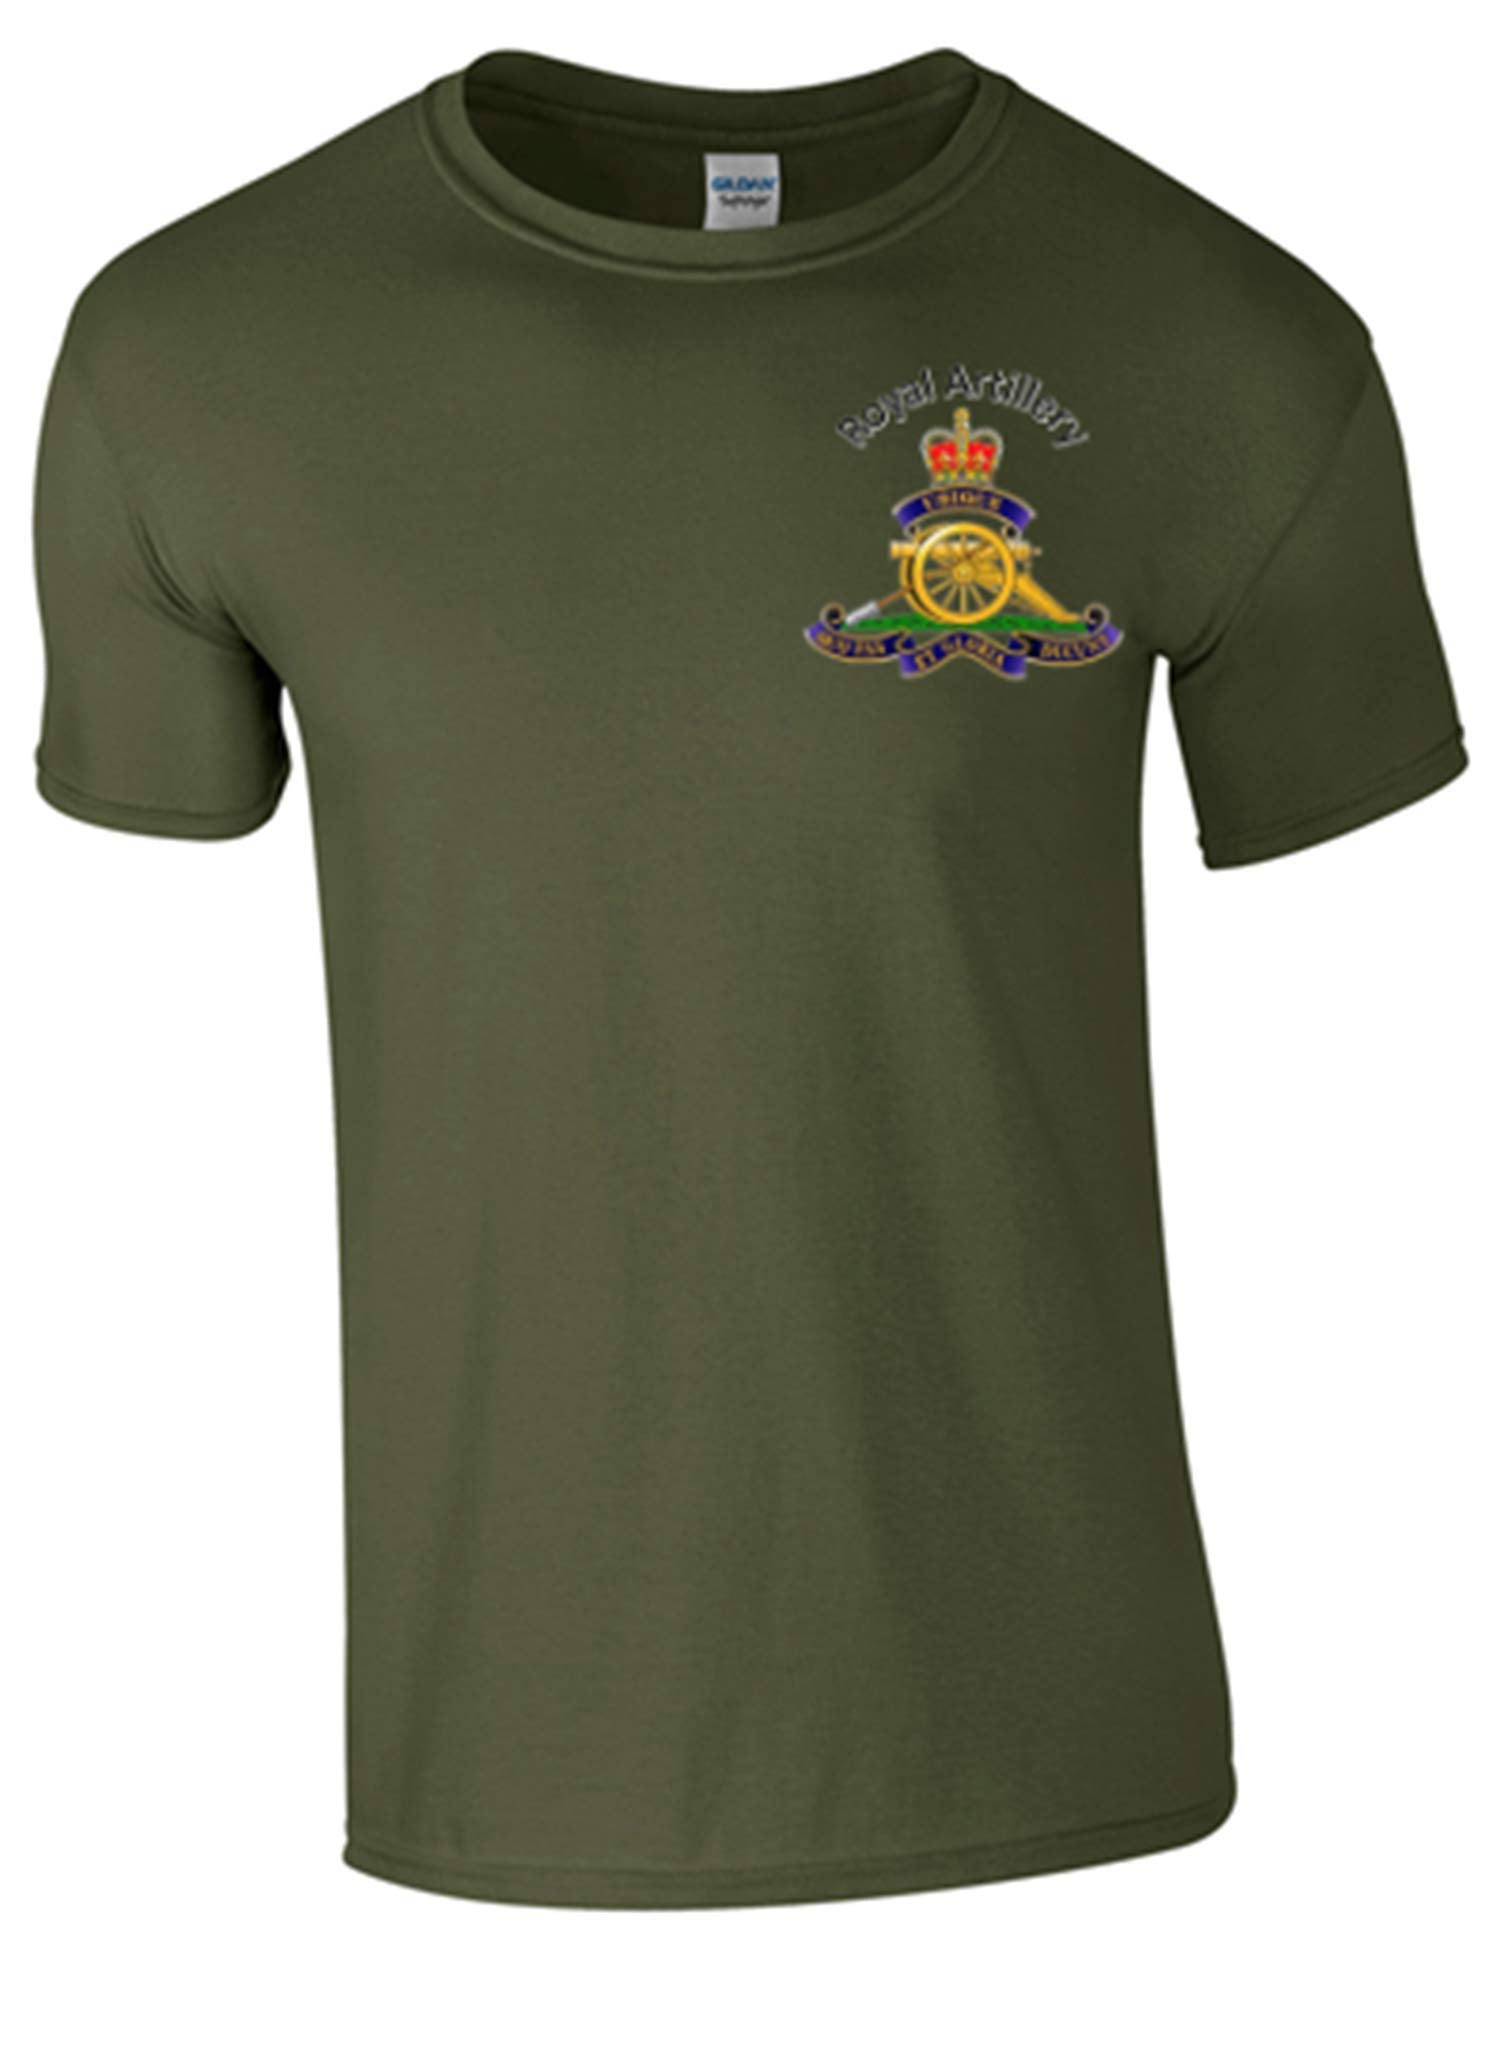 Army 1157 Kit The Royal Regiment of Artillery T-Shirt (M) - Army 1157 kit Army 1157 Kit